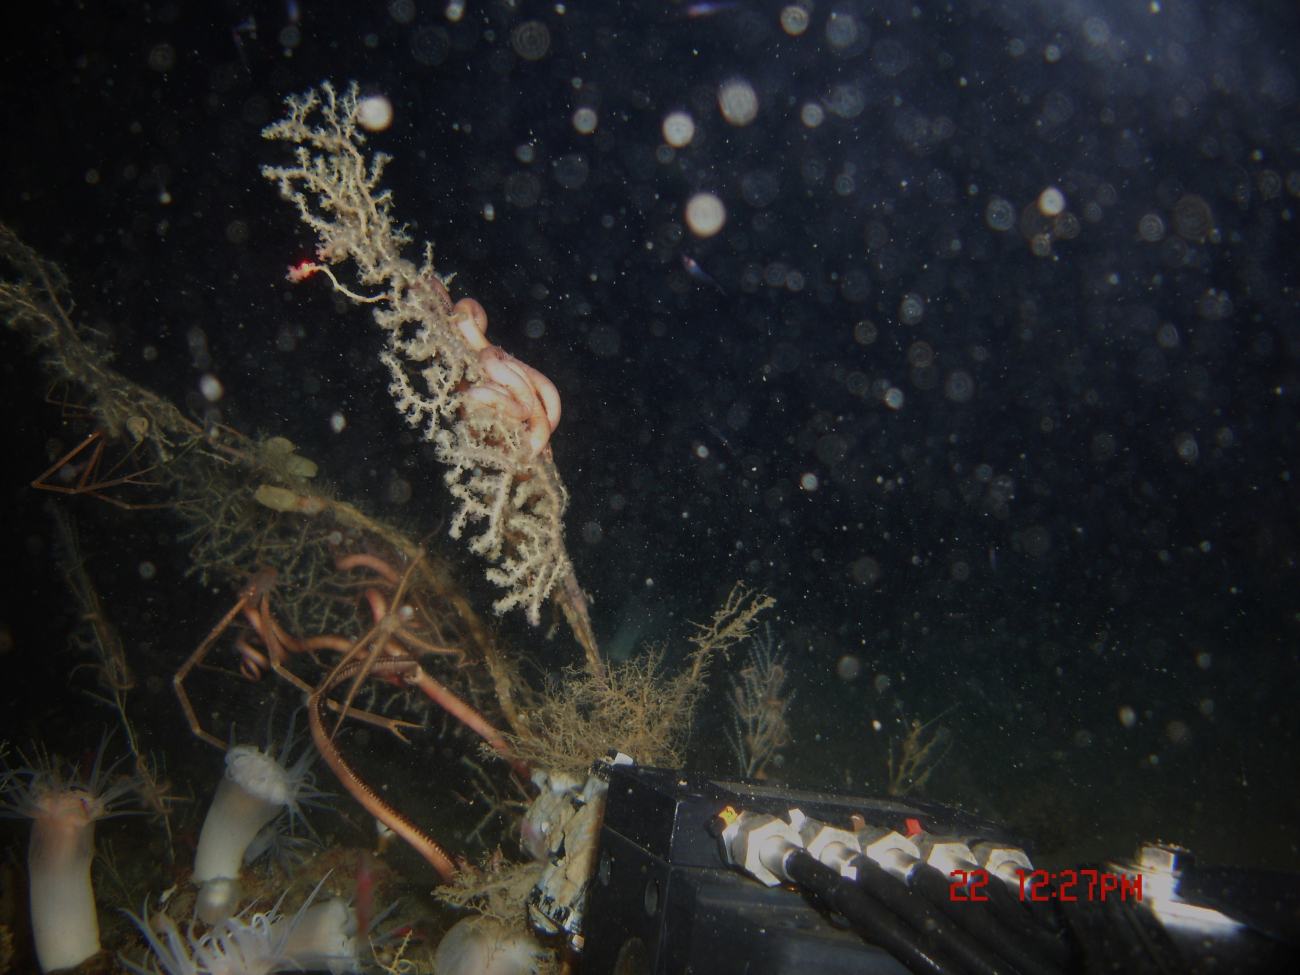 Looking over the ROV to various corals and anemones